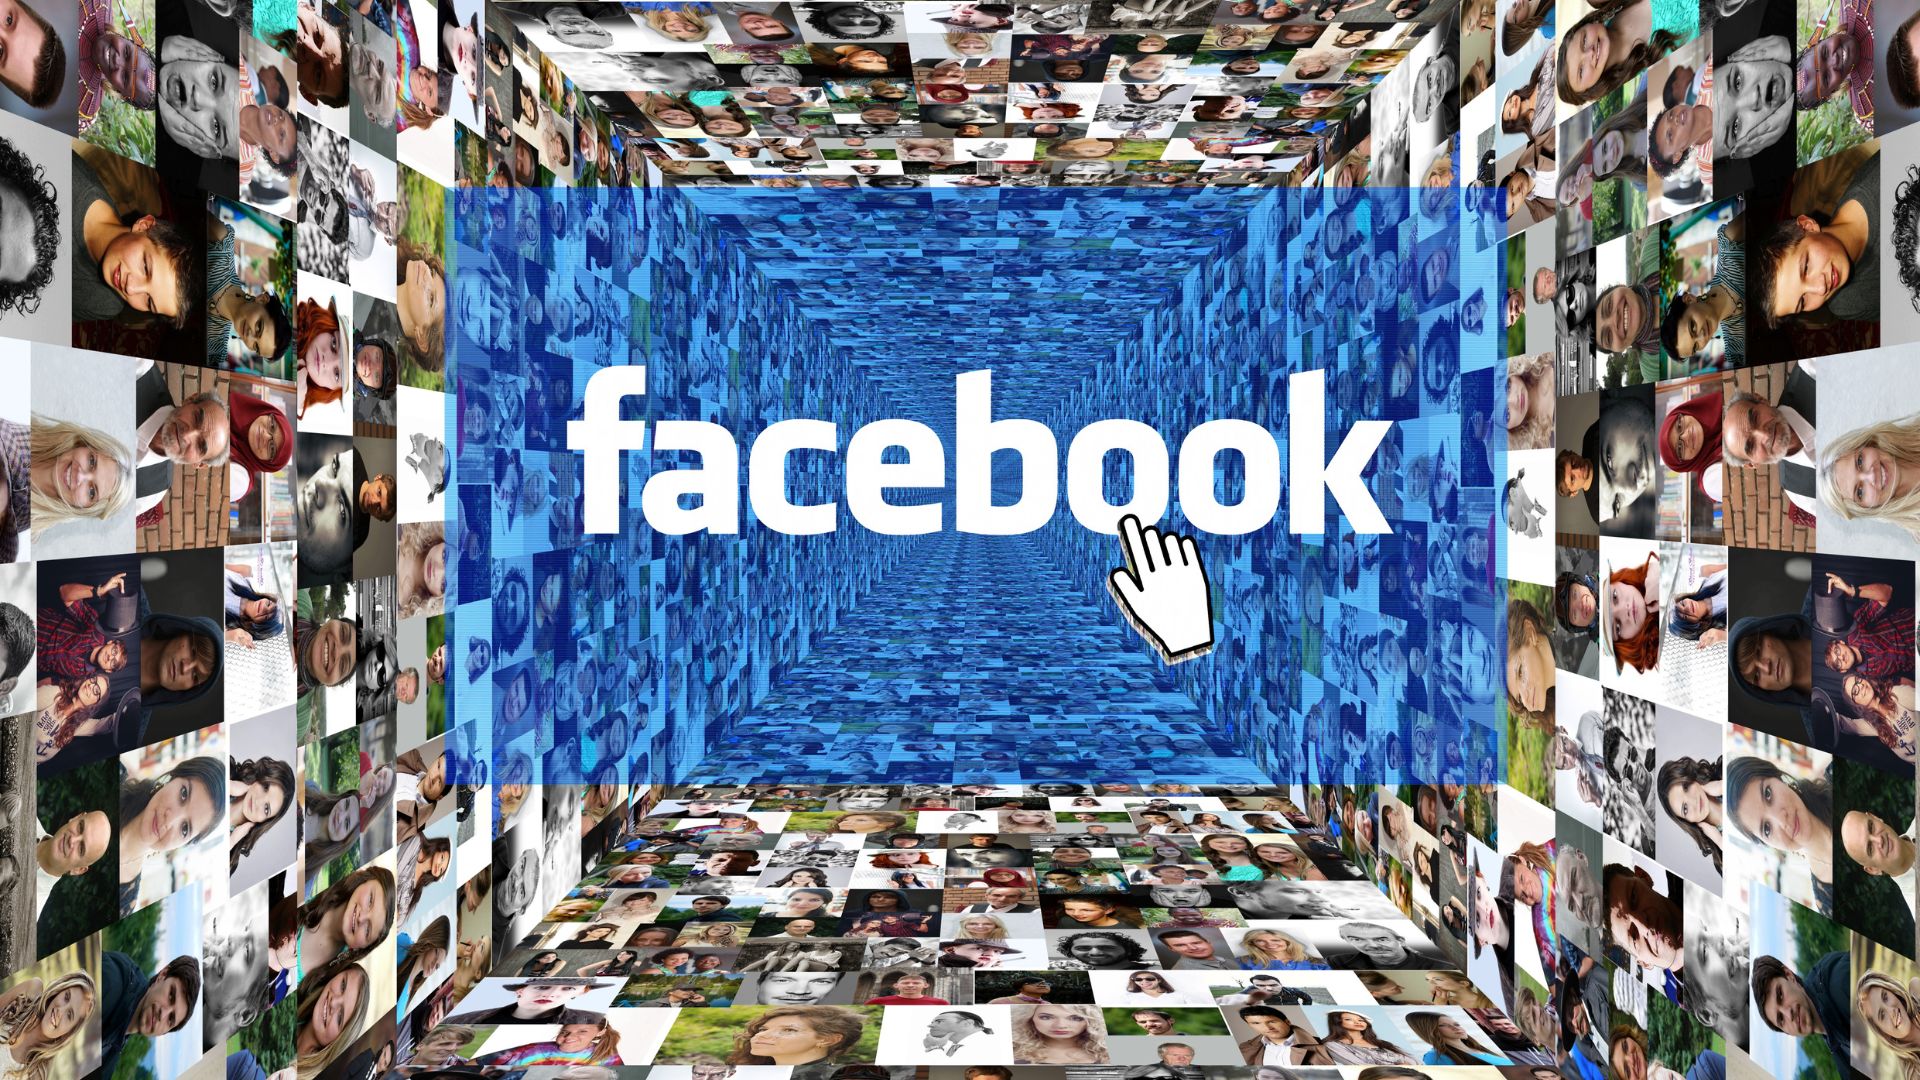 Facebook is also a platform where a lot of behavioural advertising occurs